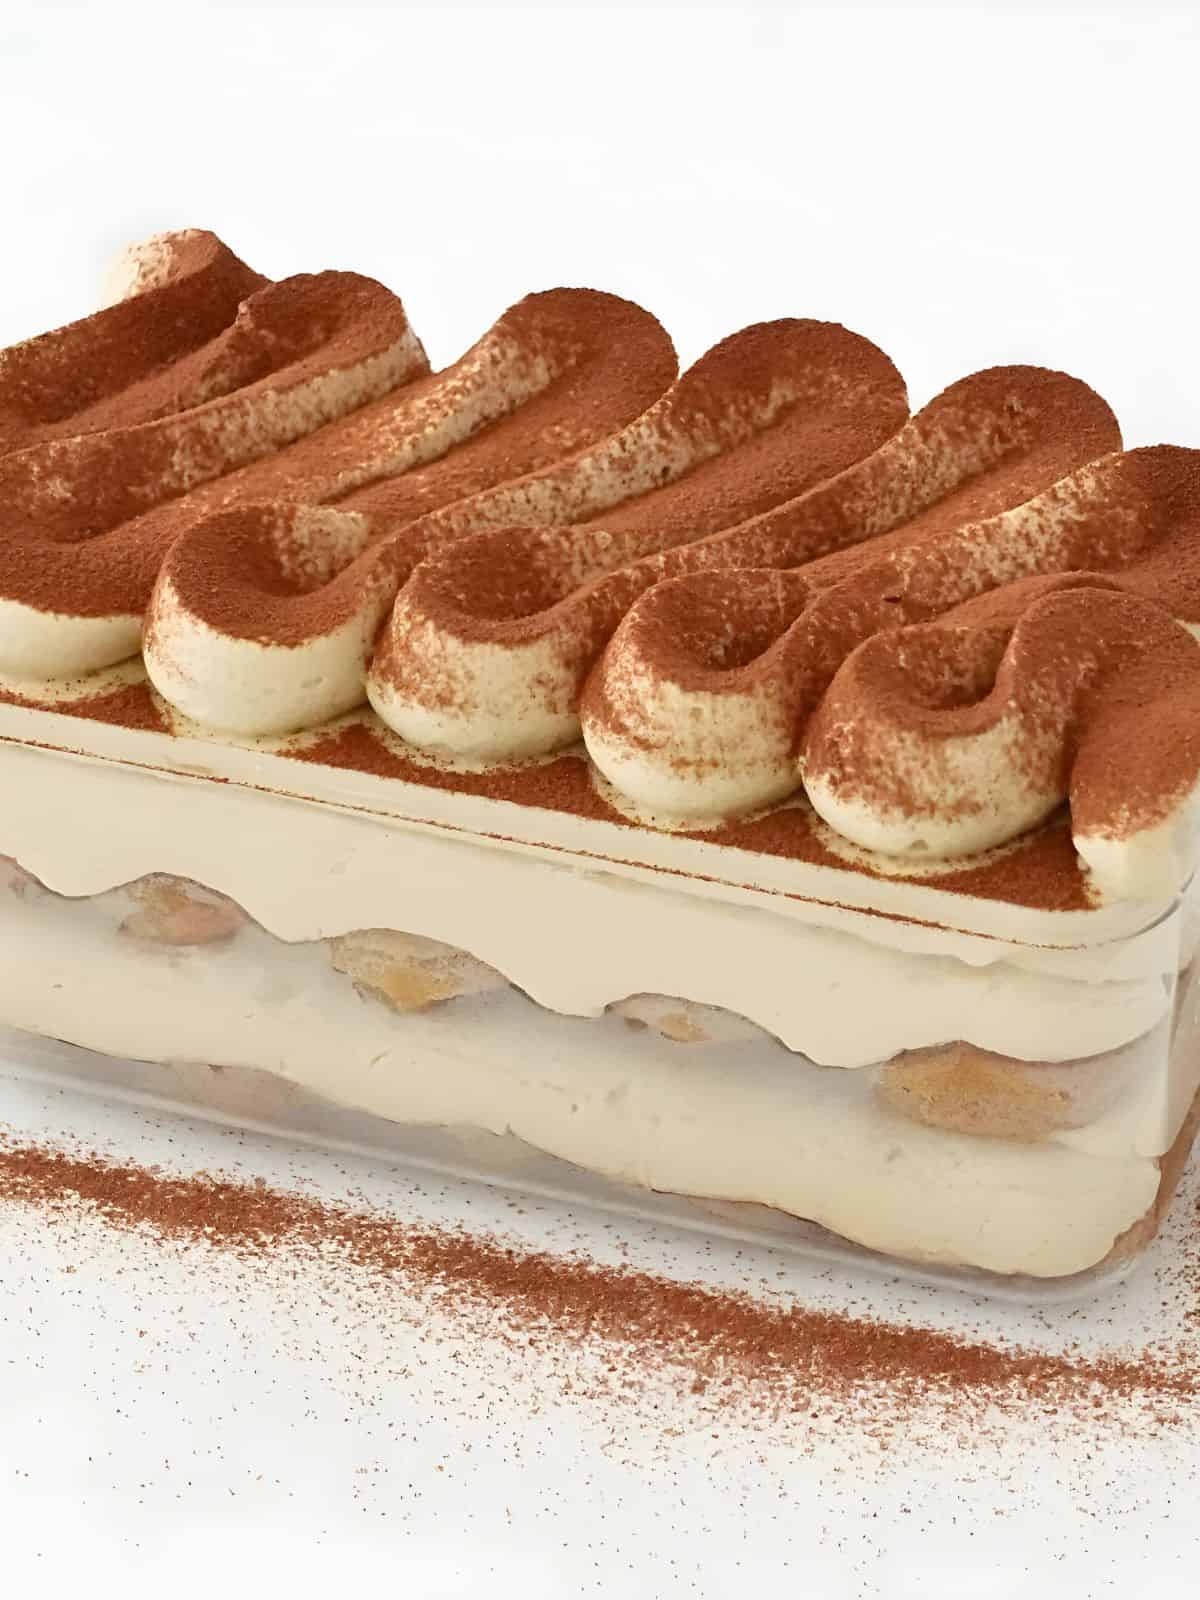 caramel coffee dessert box made with layers of delicious coffee cream sandwiched between coffee-dipped biscuits, topped with caramel latte-flavored whipped cream.